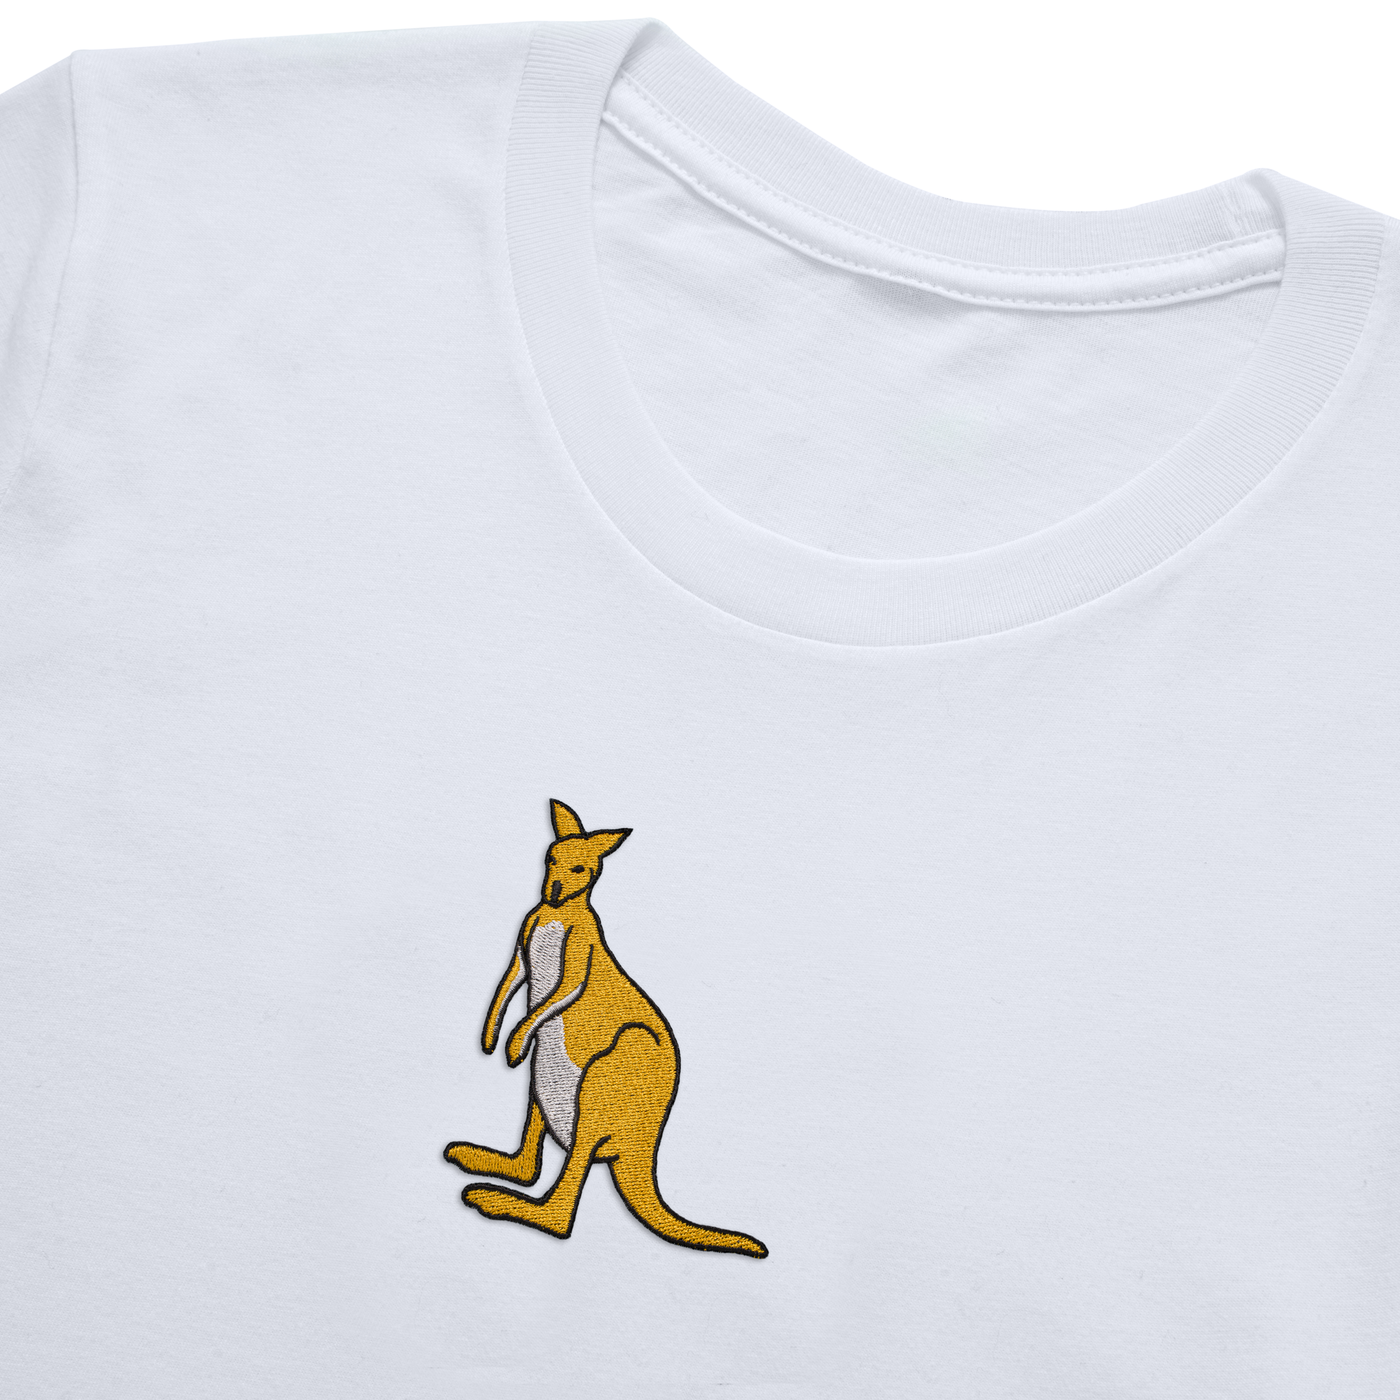 Bobby's Planet Kids Embroidered Kangaroo T-Shirt from Australia Down Under Animals Collection in White Color#color_white